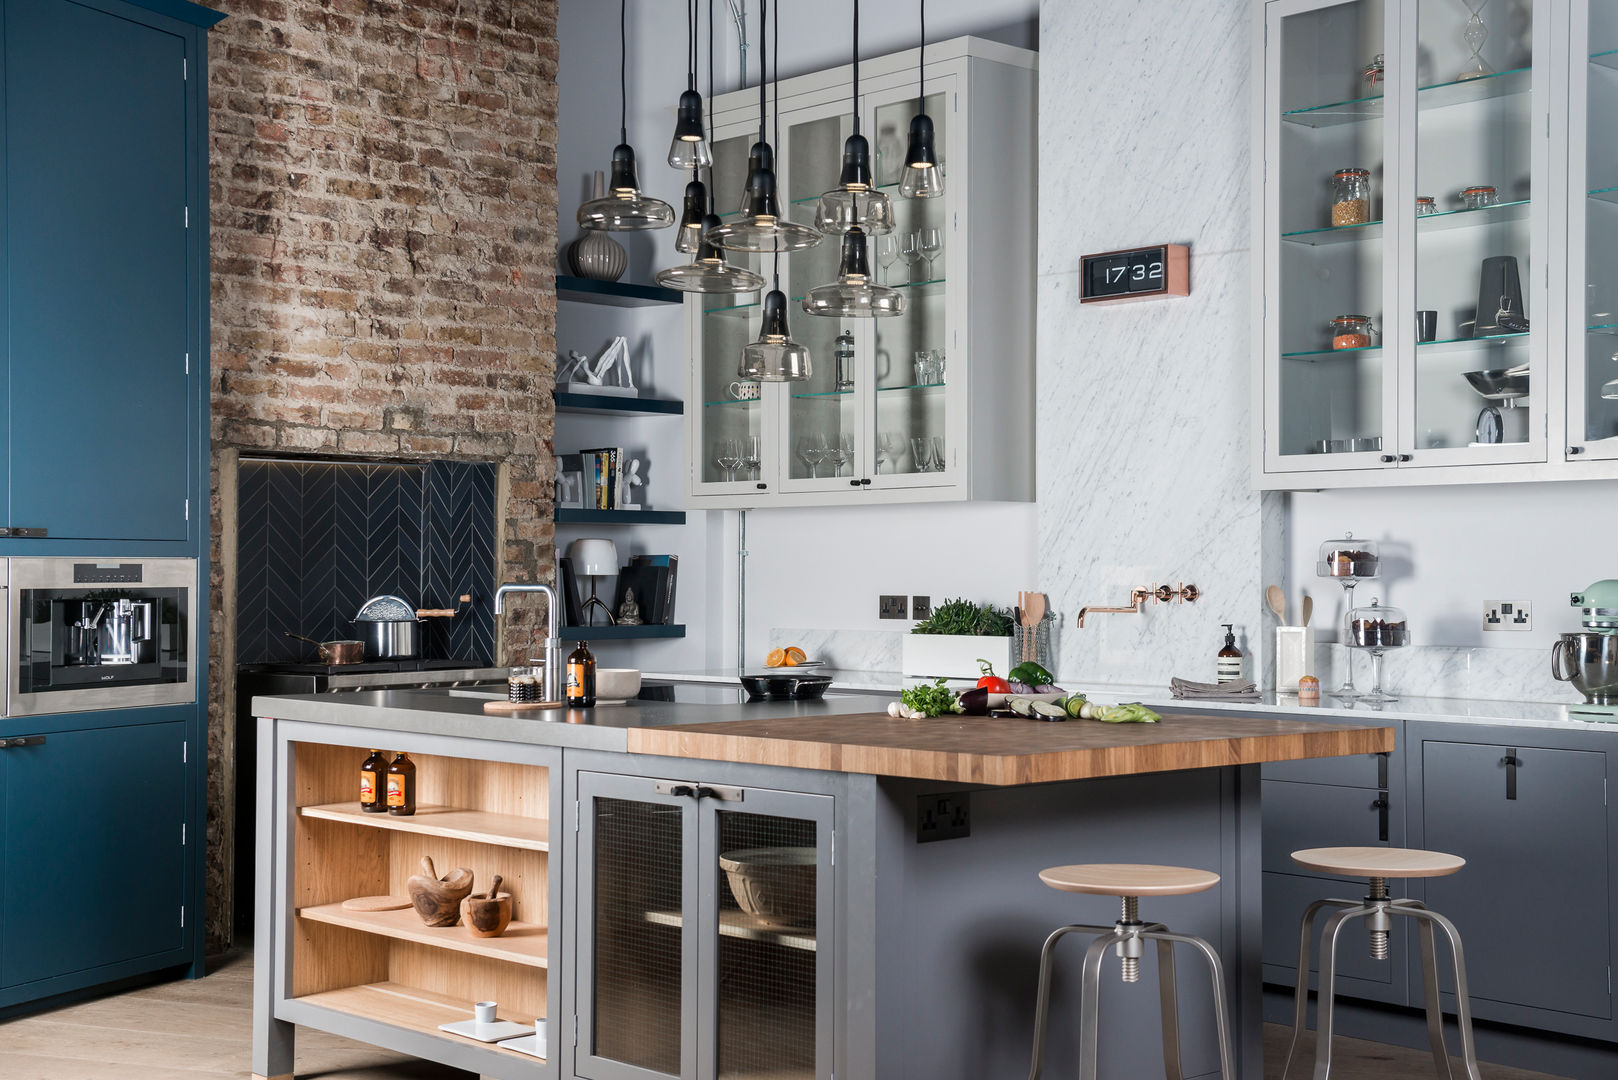 W9 | Eclectic Industrialism Davonport Industrial style kitchen Wood Grey